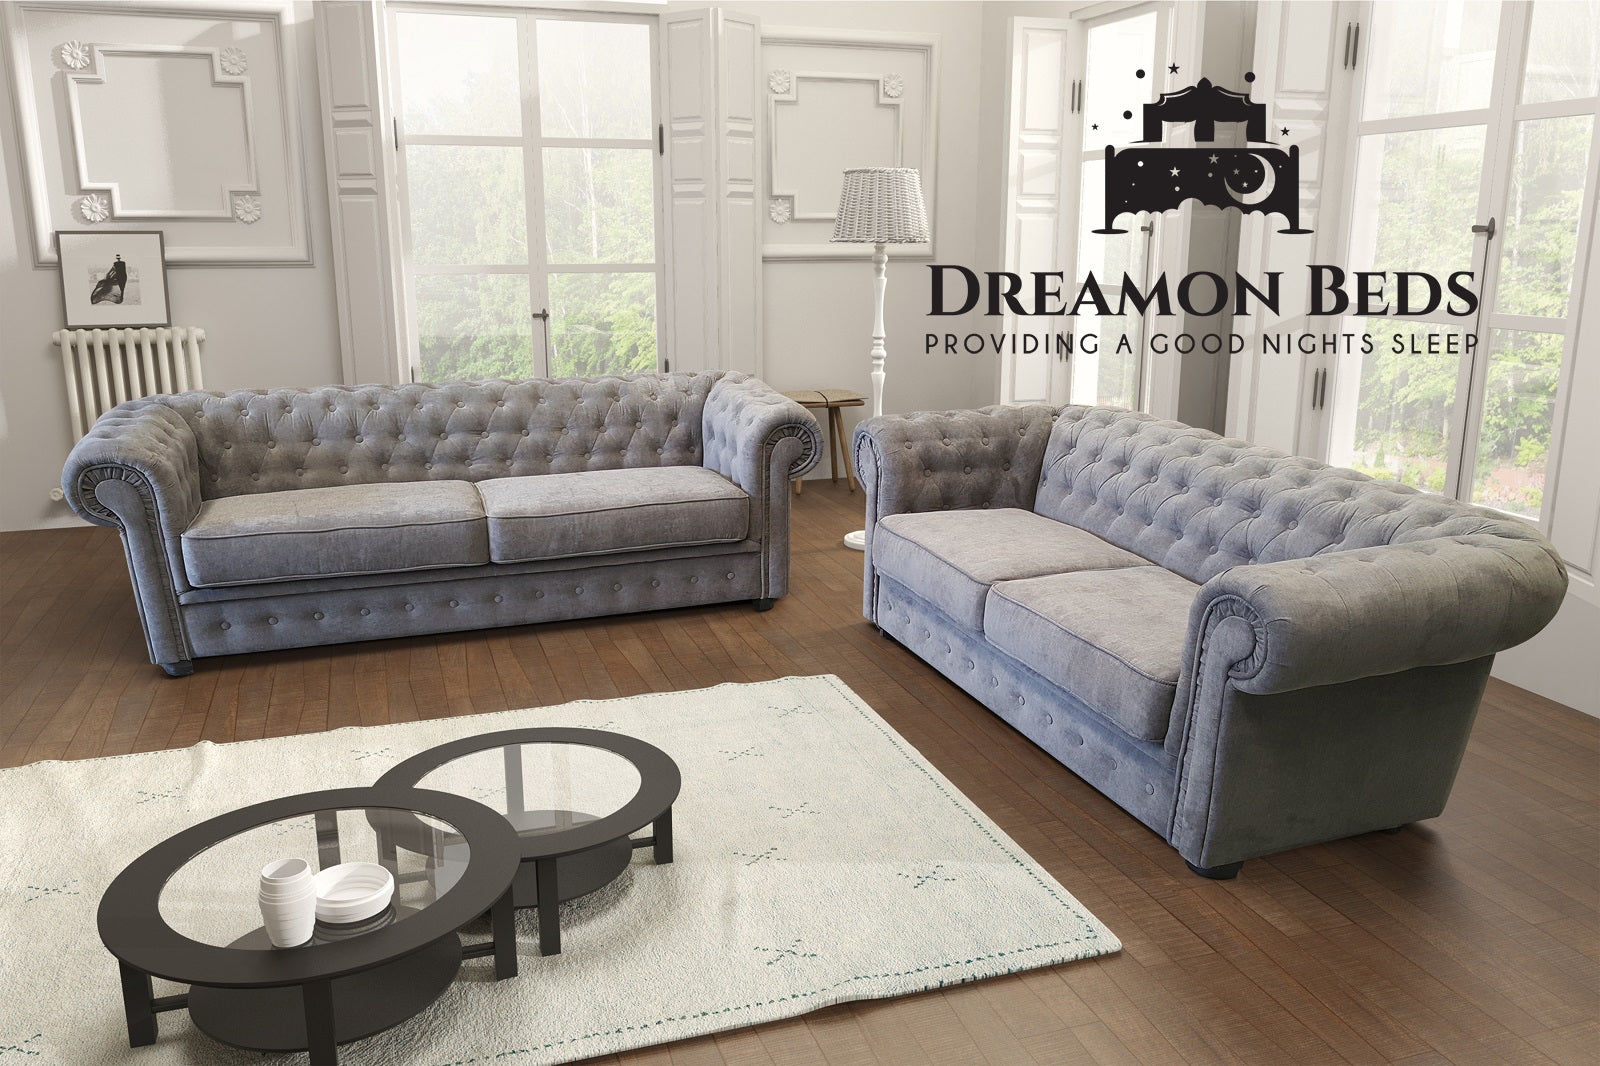 Luxury Designer Chesterfield Imperial Sofa – Finished In A Range Of Colours & Fabrics – Dreamon Beds